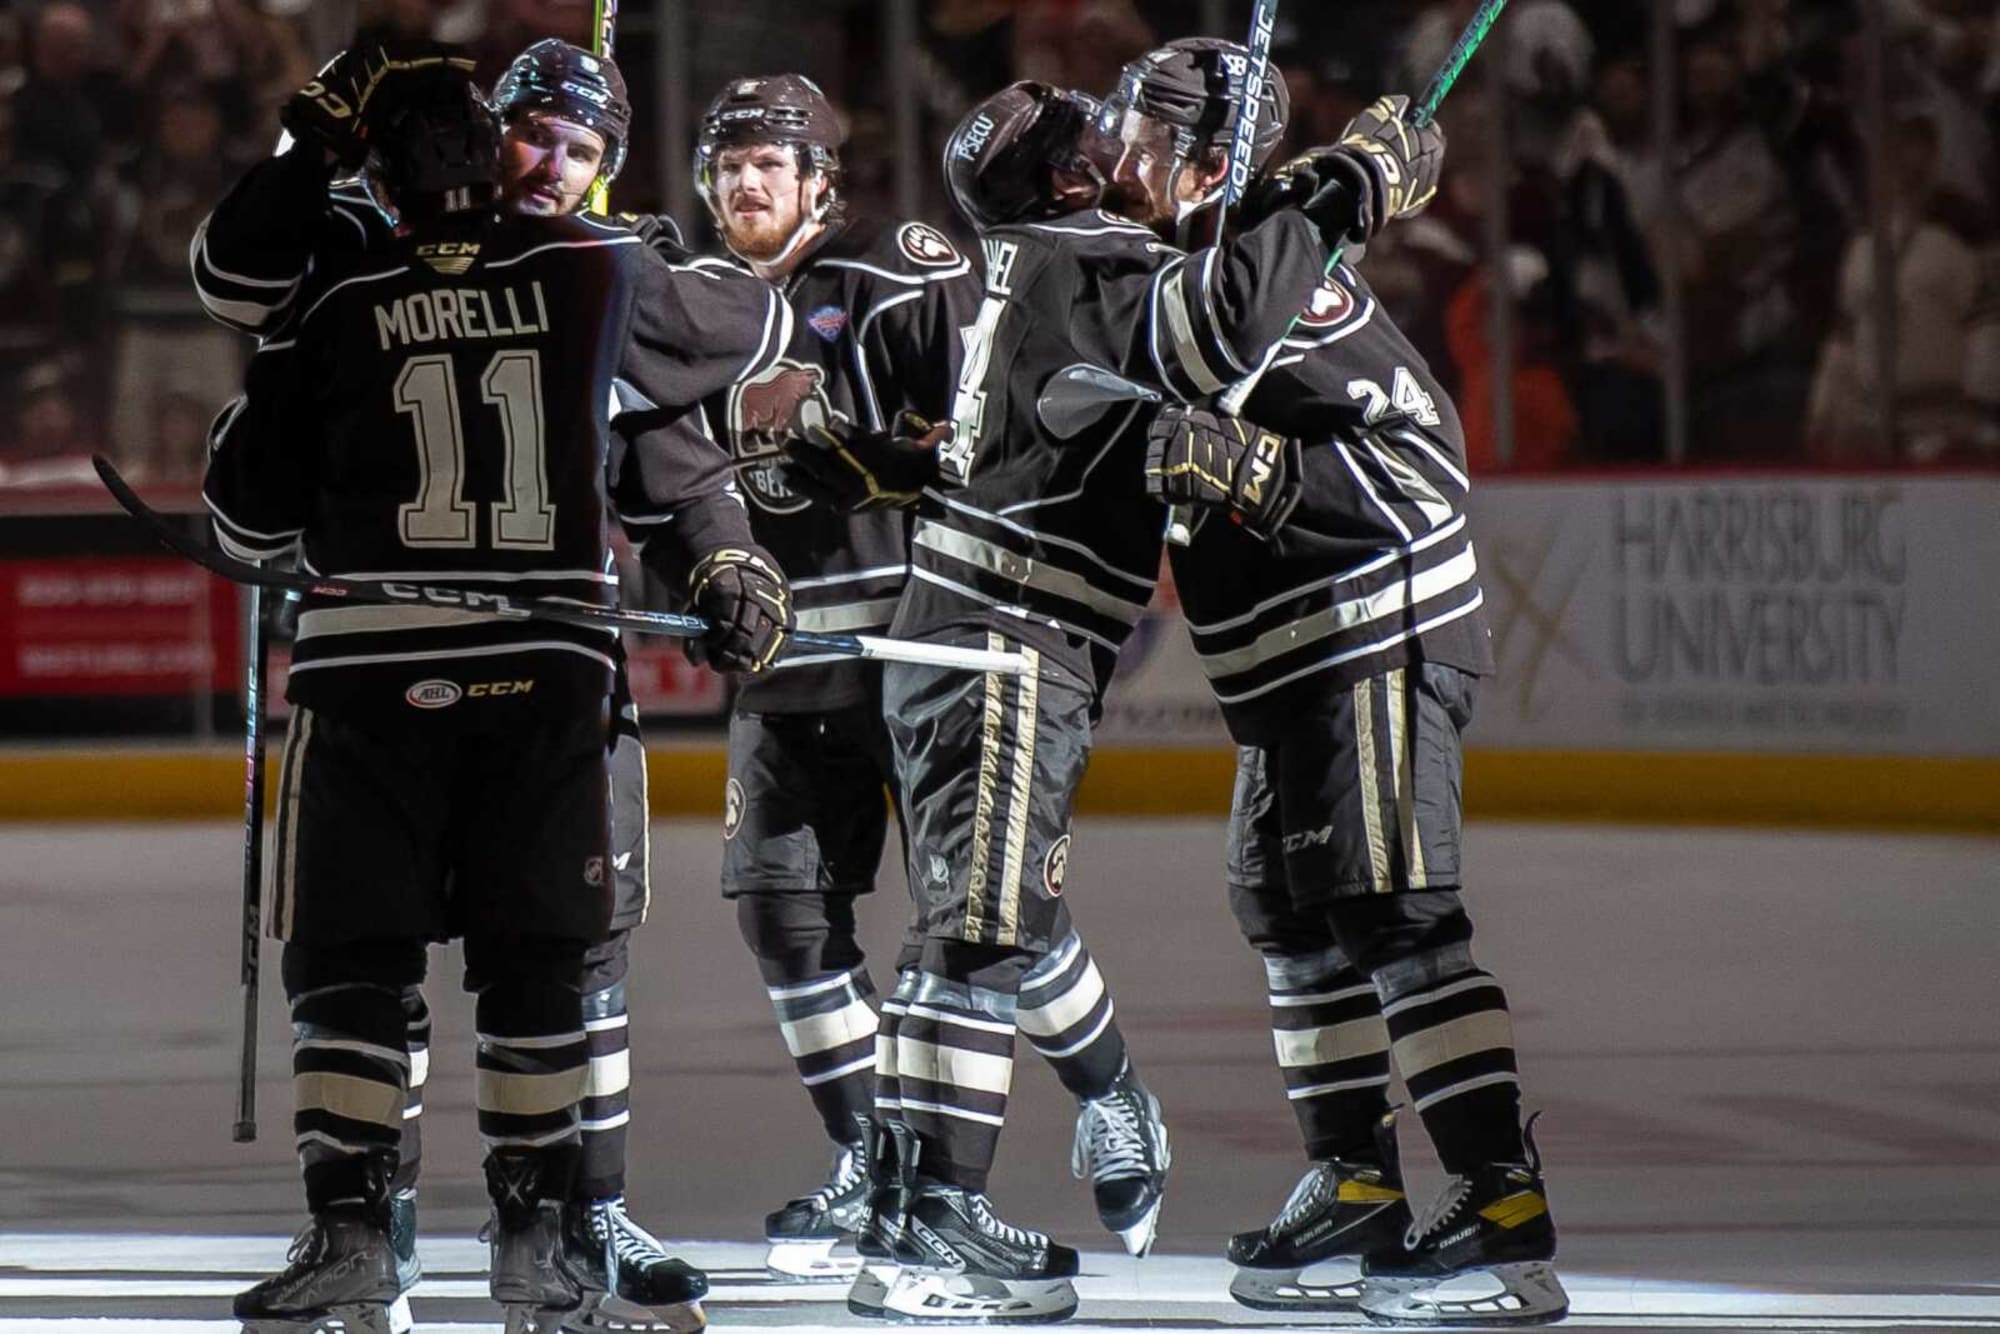 Bears Open 2023 with 3-1 Loss to Checkers